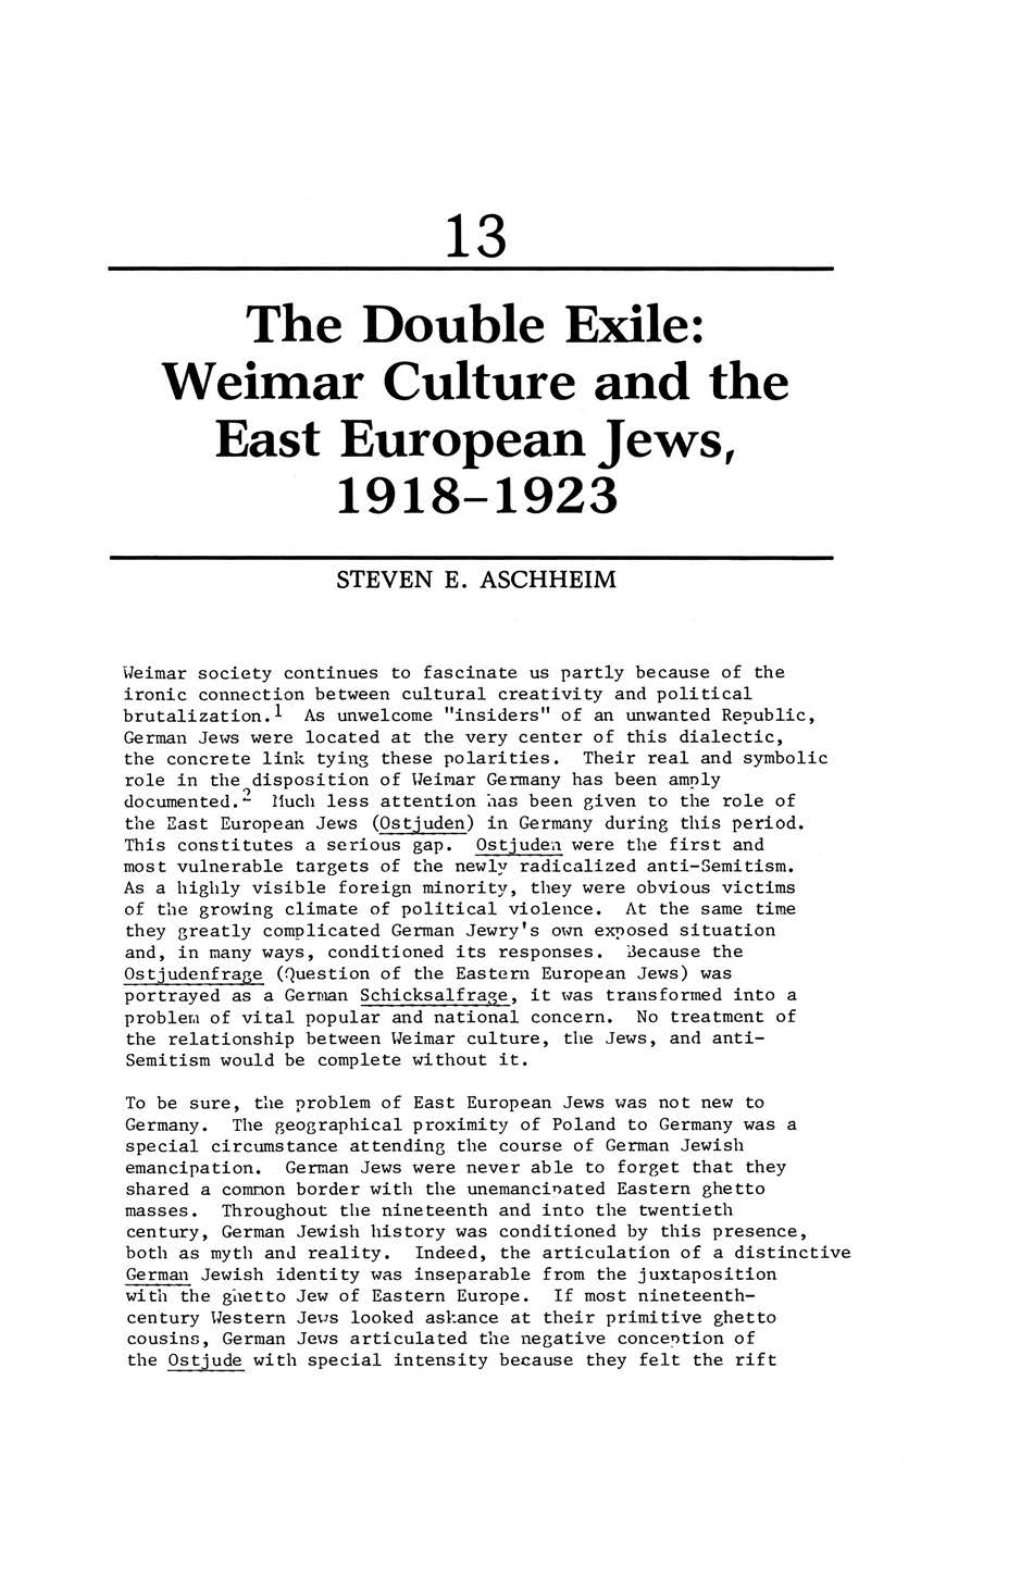 Weimar Culture and the East European Jews, 1918-1923